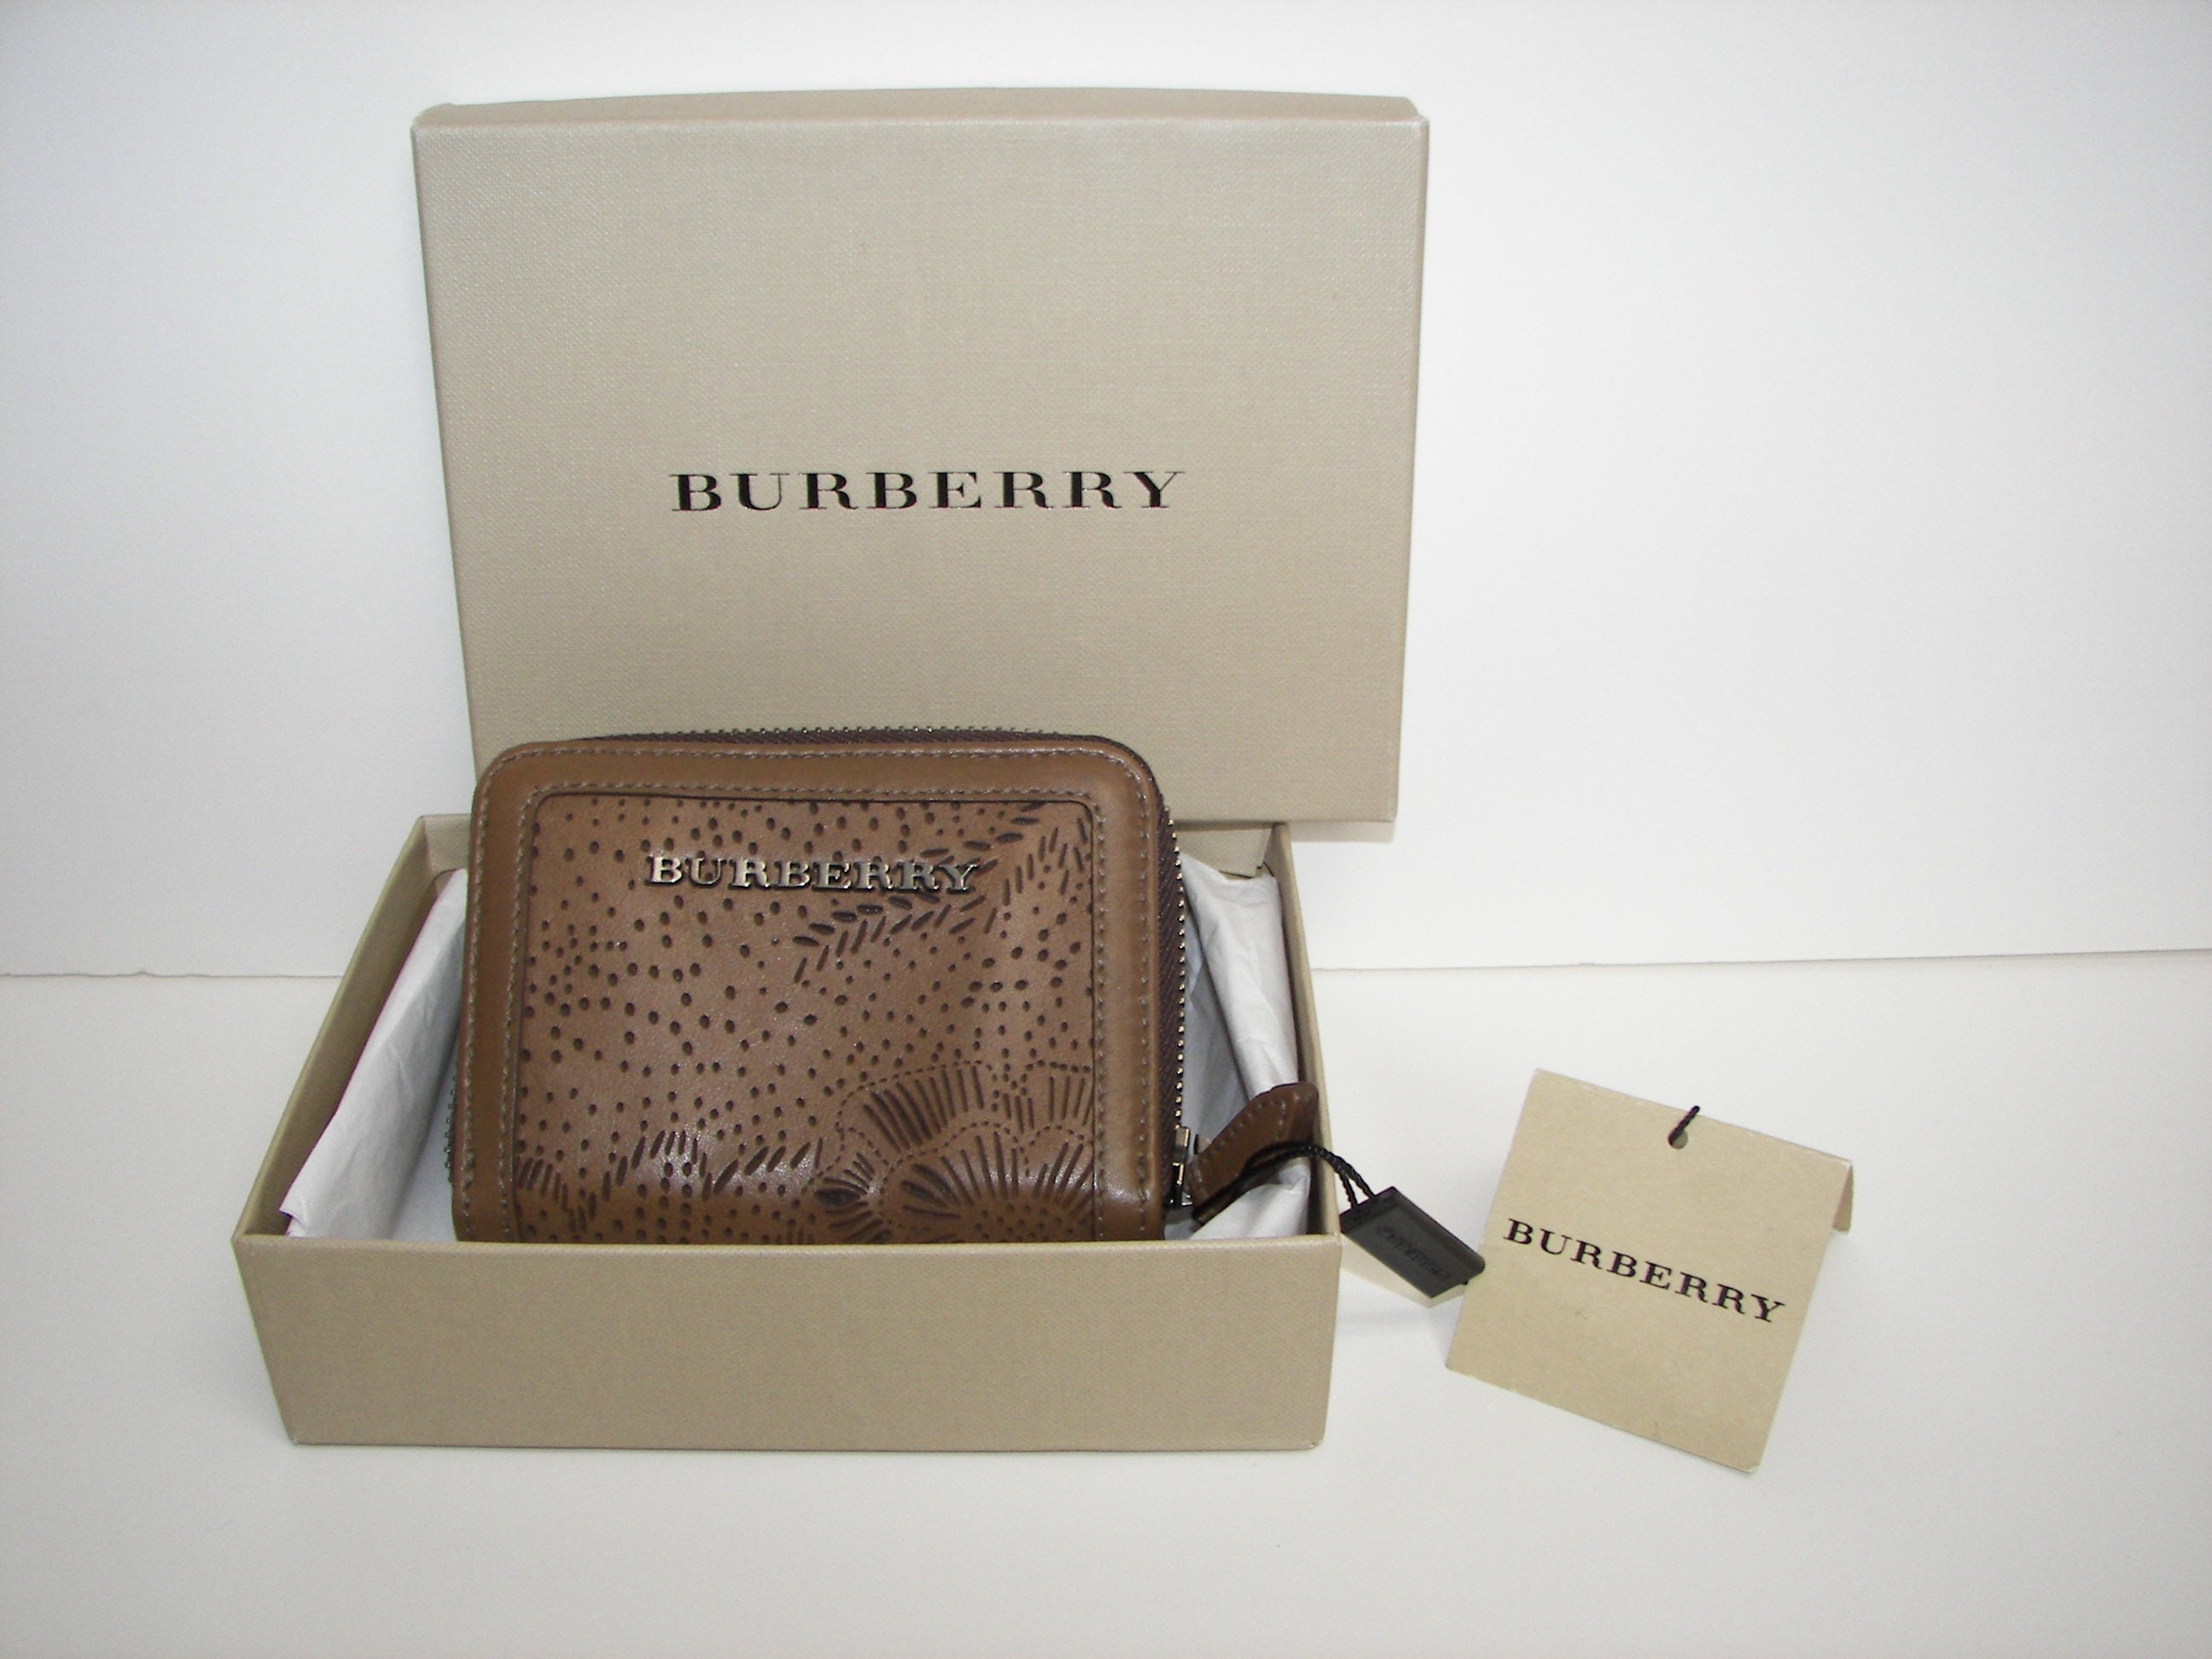 Burberry, Bags, Euc Burberry Bifold Wallet With Dust Bag And Original Box